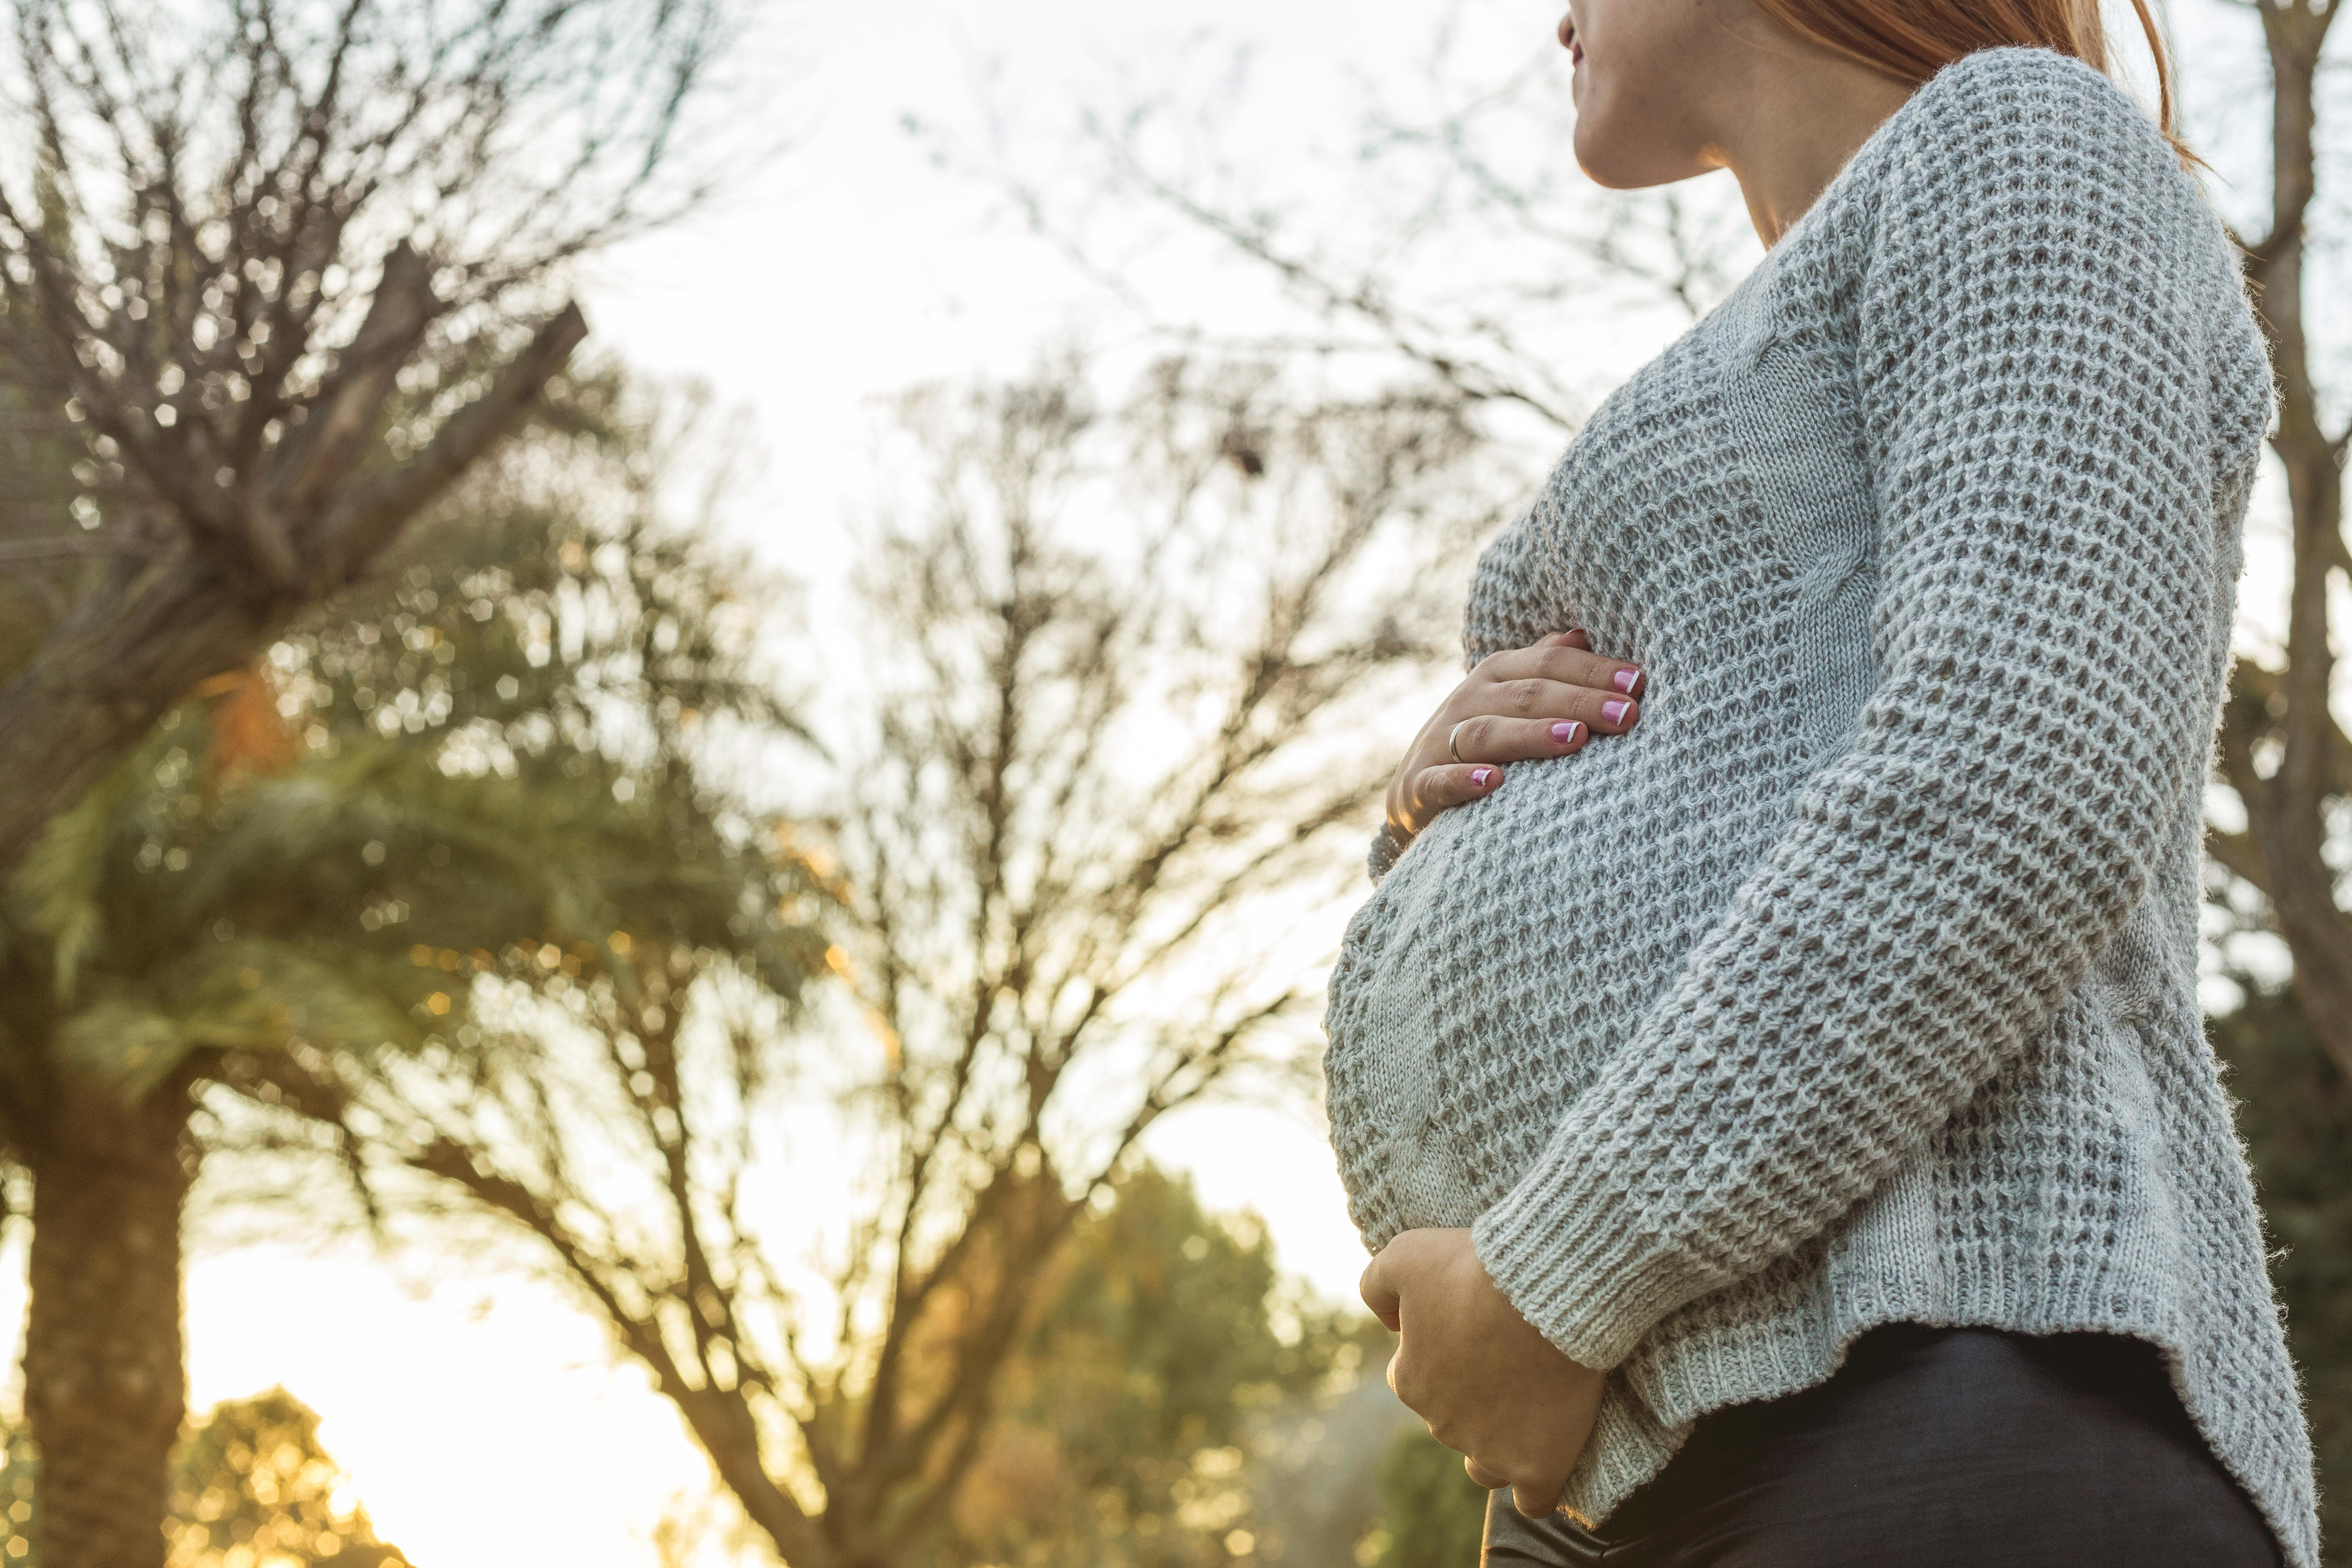 5 key facts about Covid-19 vaccines that pregnant women need to know The Independent